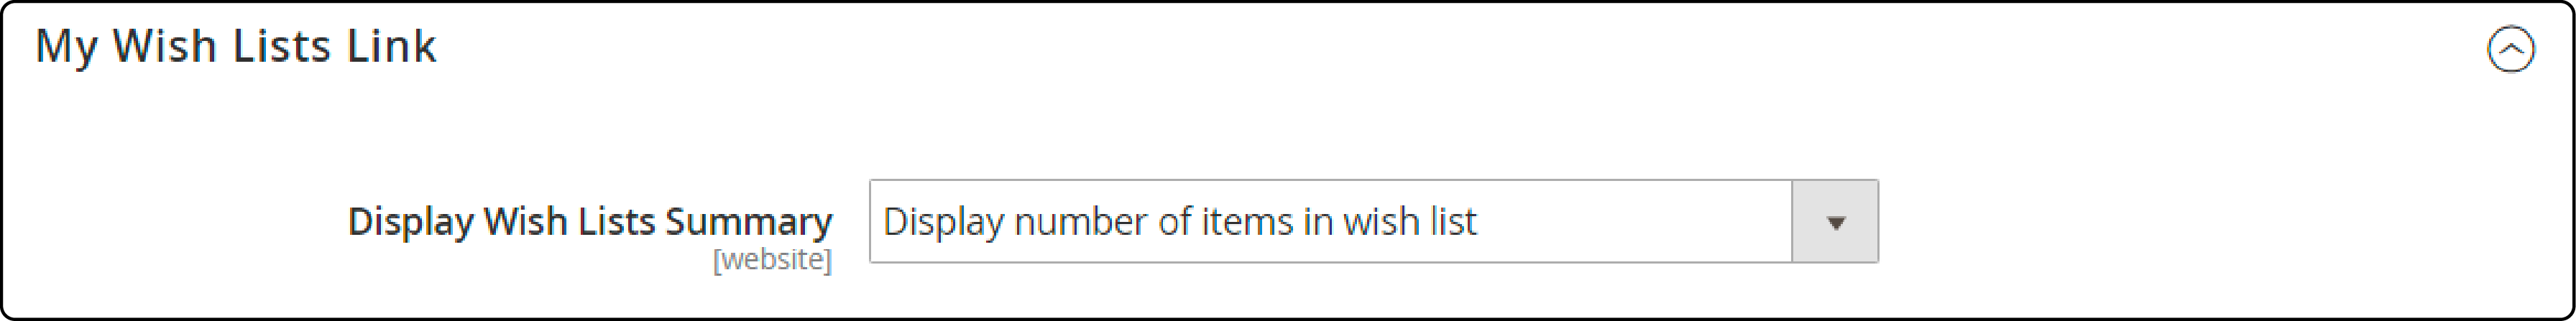 Configuring the display settings for My Wish List link in Magento 2